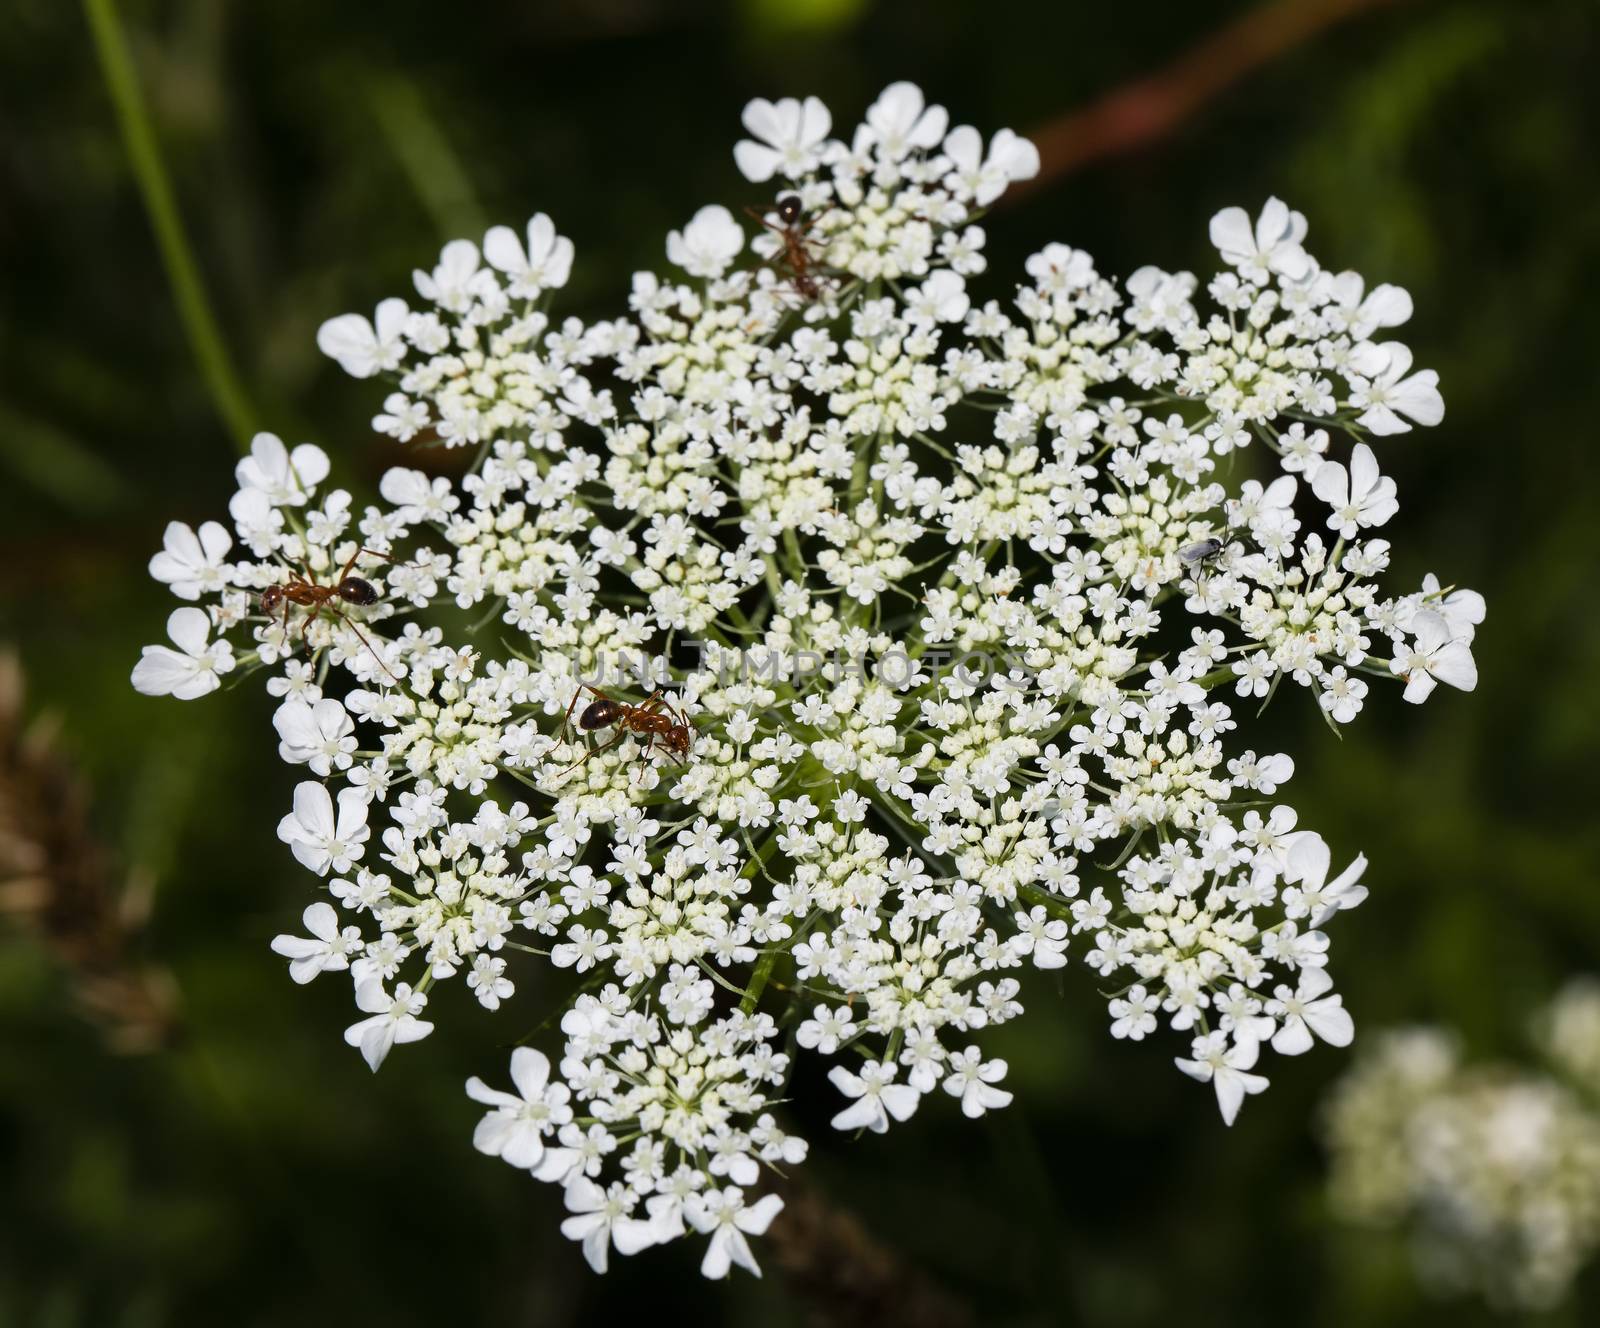 Queen Anne's Lace and Insects by CharlieFloyd